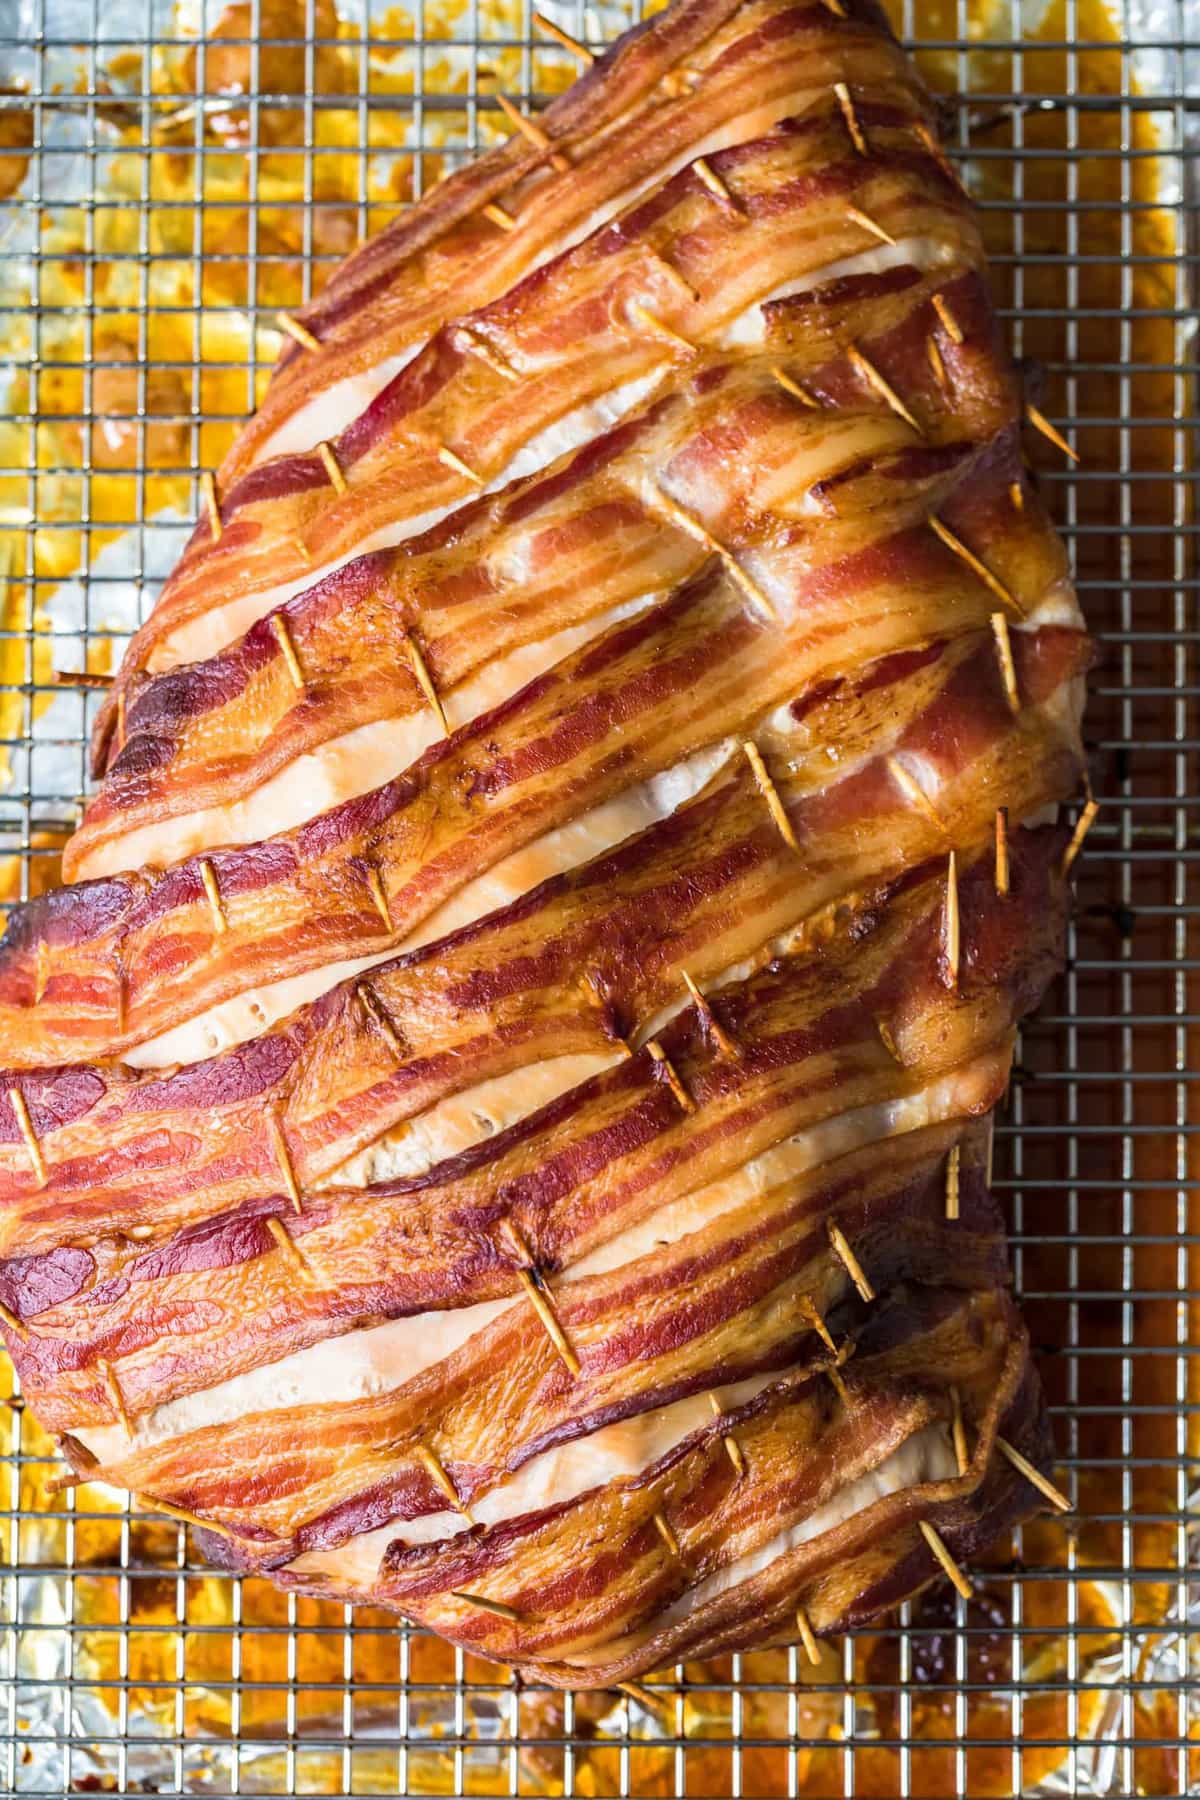 The bacon wrapped turkey breast on a cooling rack